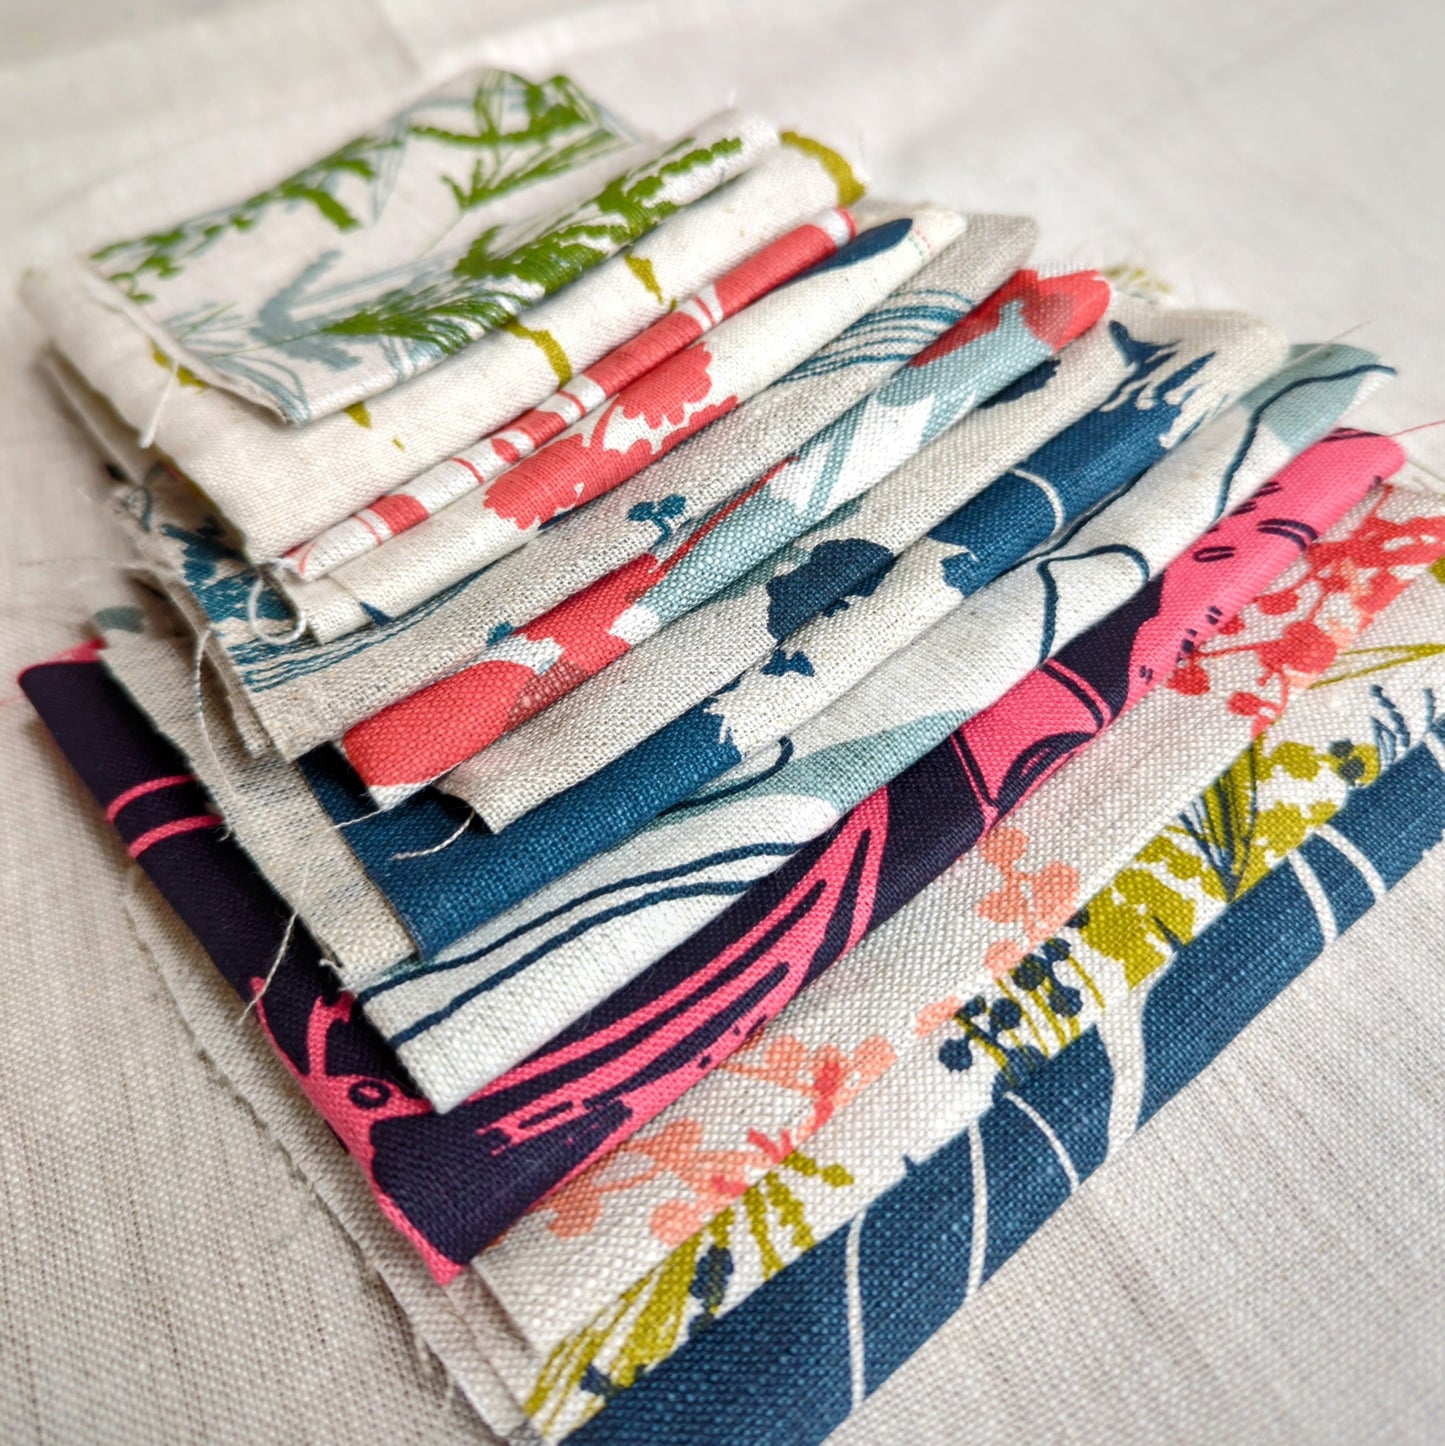 Fabric bundles and remnant strips special